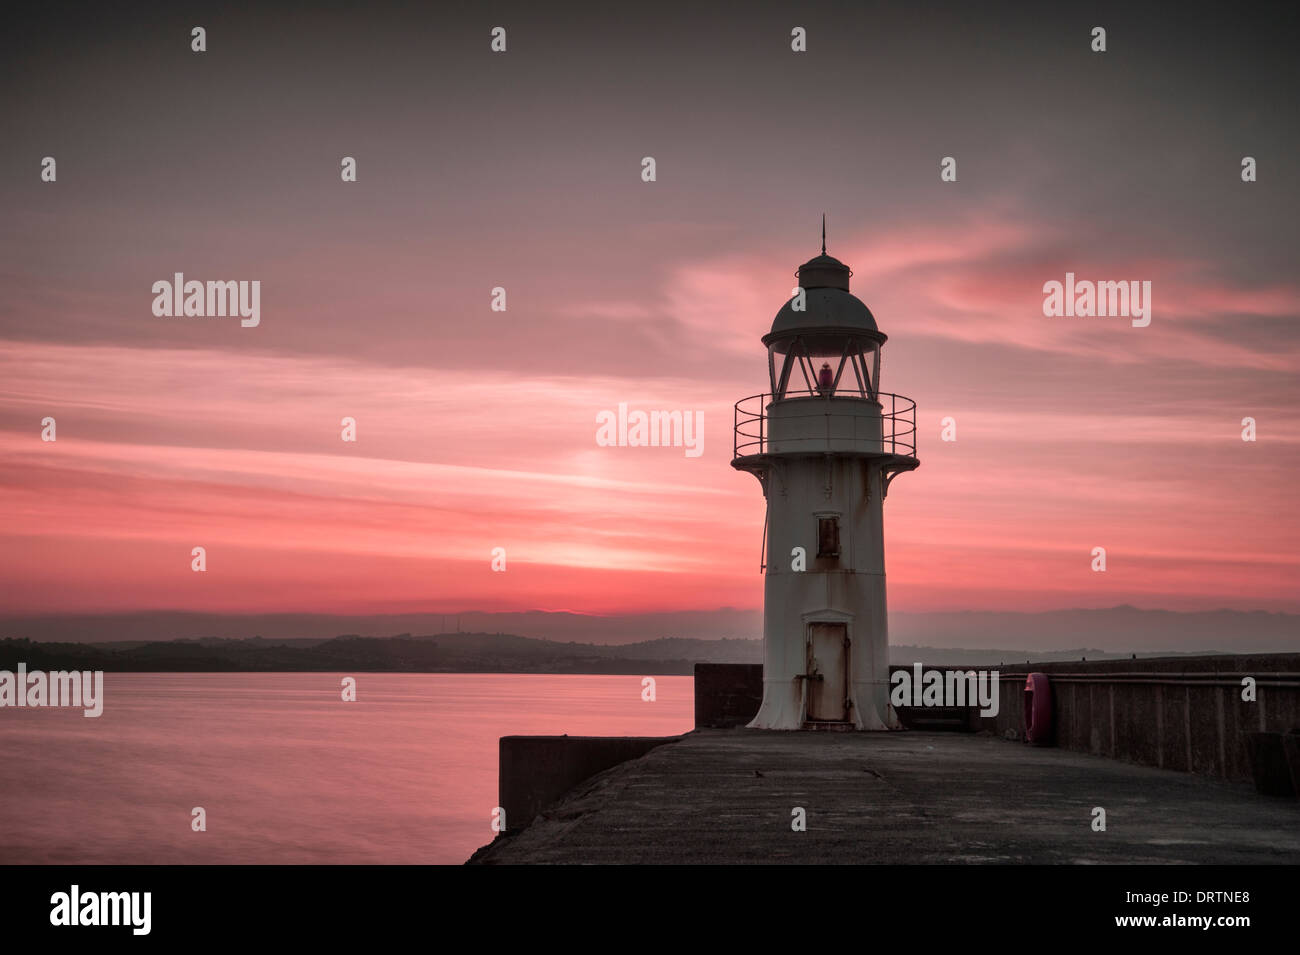 Lighthouse and breakwater in the coastal fishing port of Brixham South Devon taken at sunset. Stock Photo